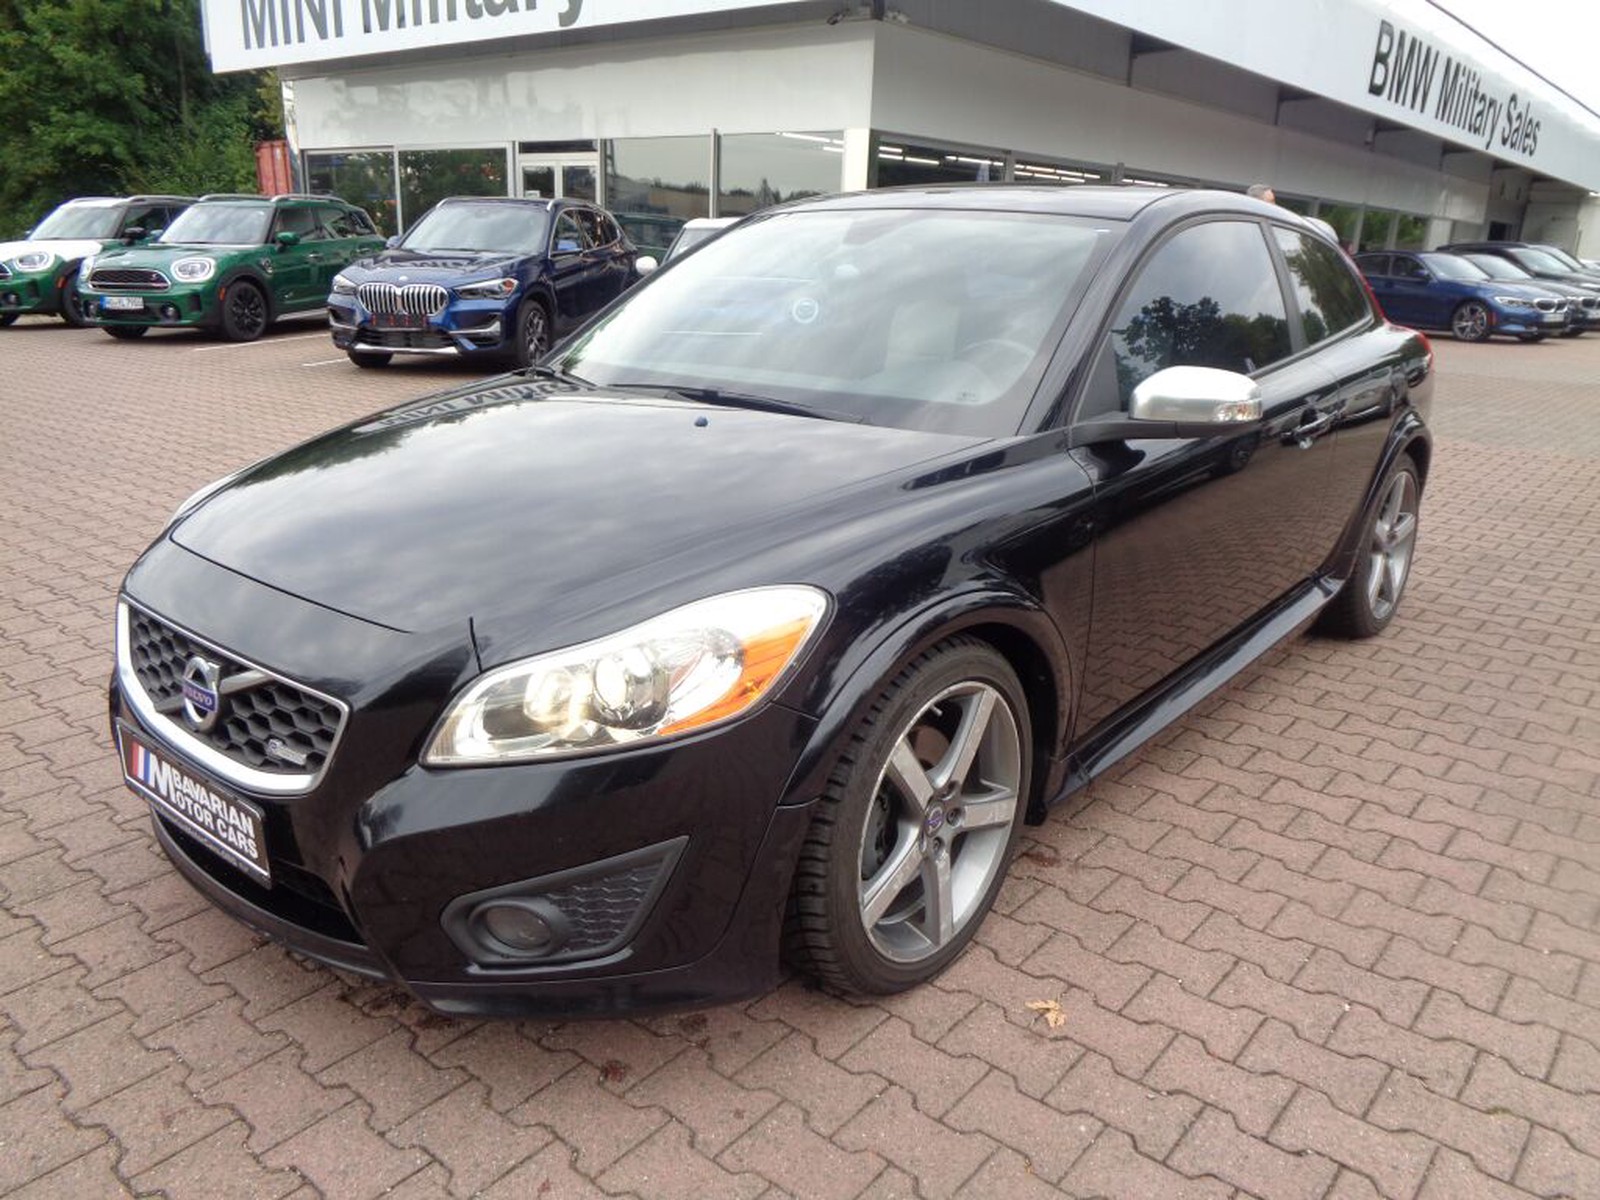 Volvo C30 Coupe R-Desing - Tax Free Military Sales in Kaiserslautern ...